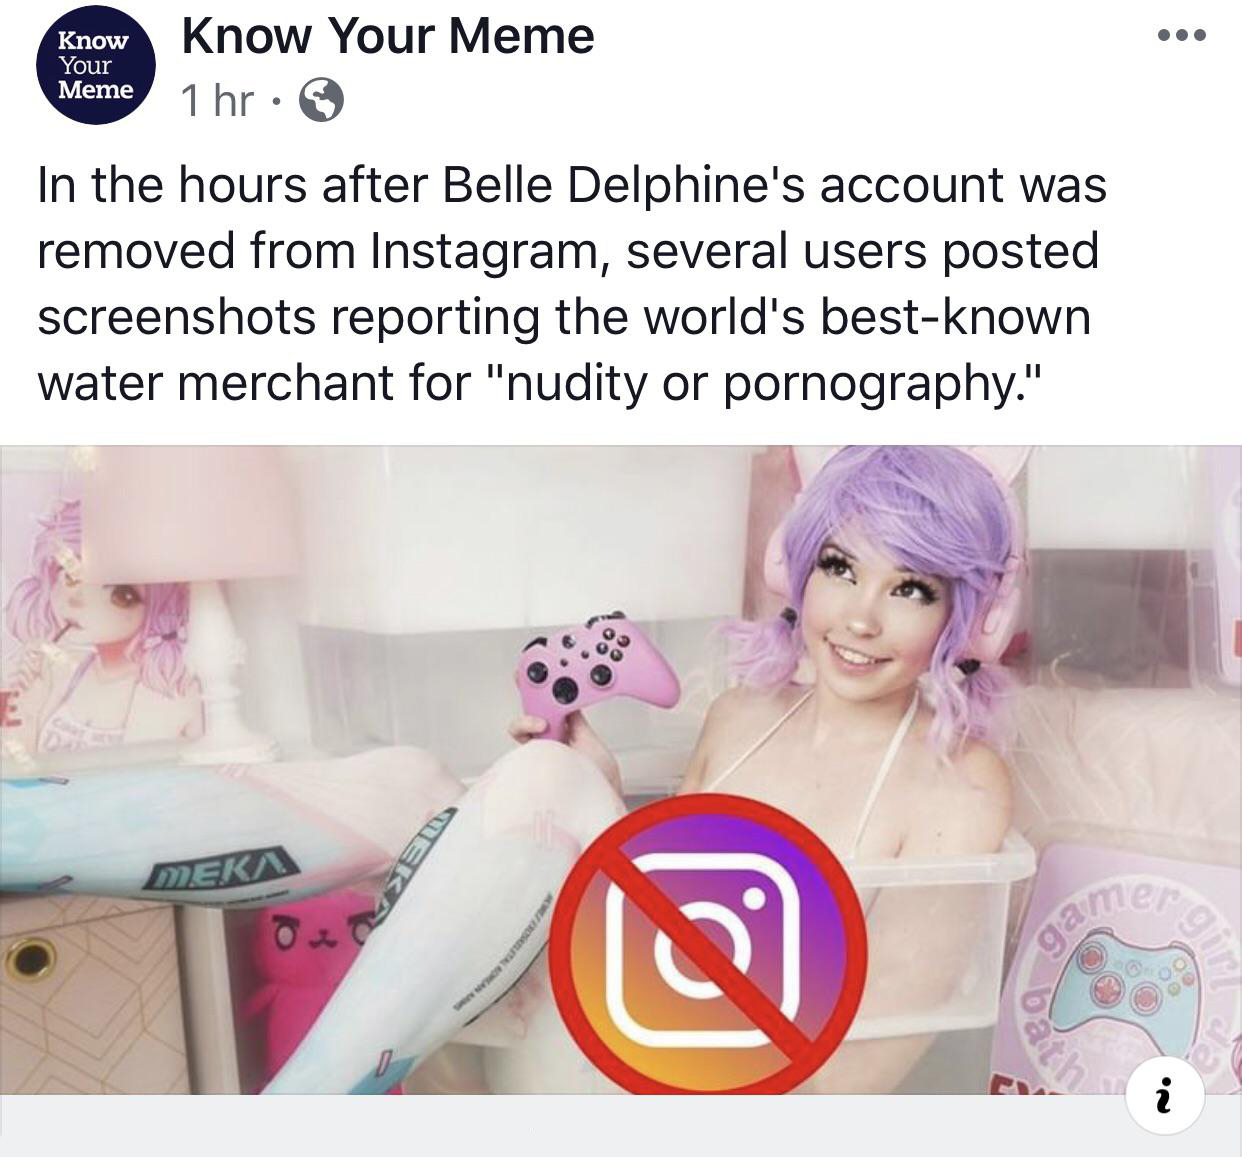 belle delphine bath water - Know kno Your Know Your Meme 1 hr. In the hours after Belle Delphine's account was removed from Instagram, several users posted screenshots reporting the world's bestknown water merchant for "nudity or pornography." Deka